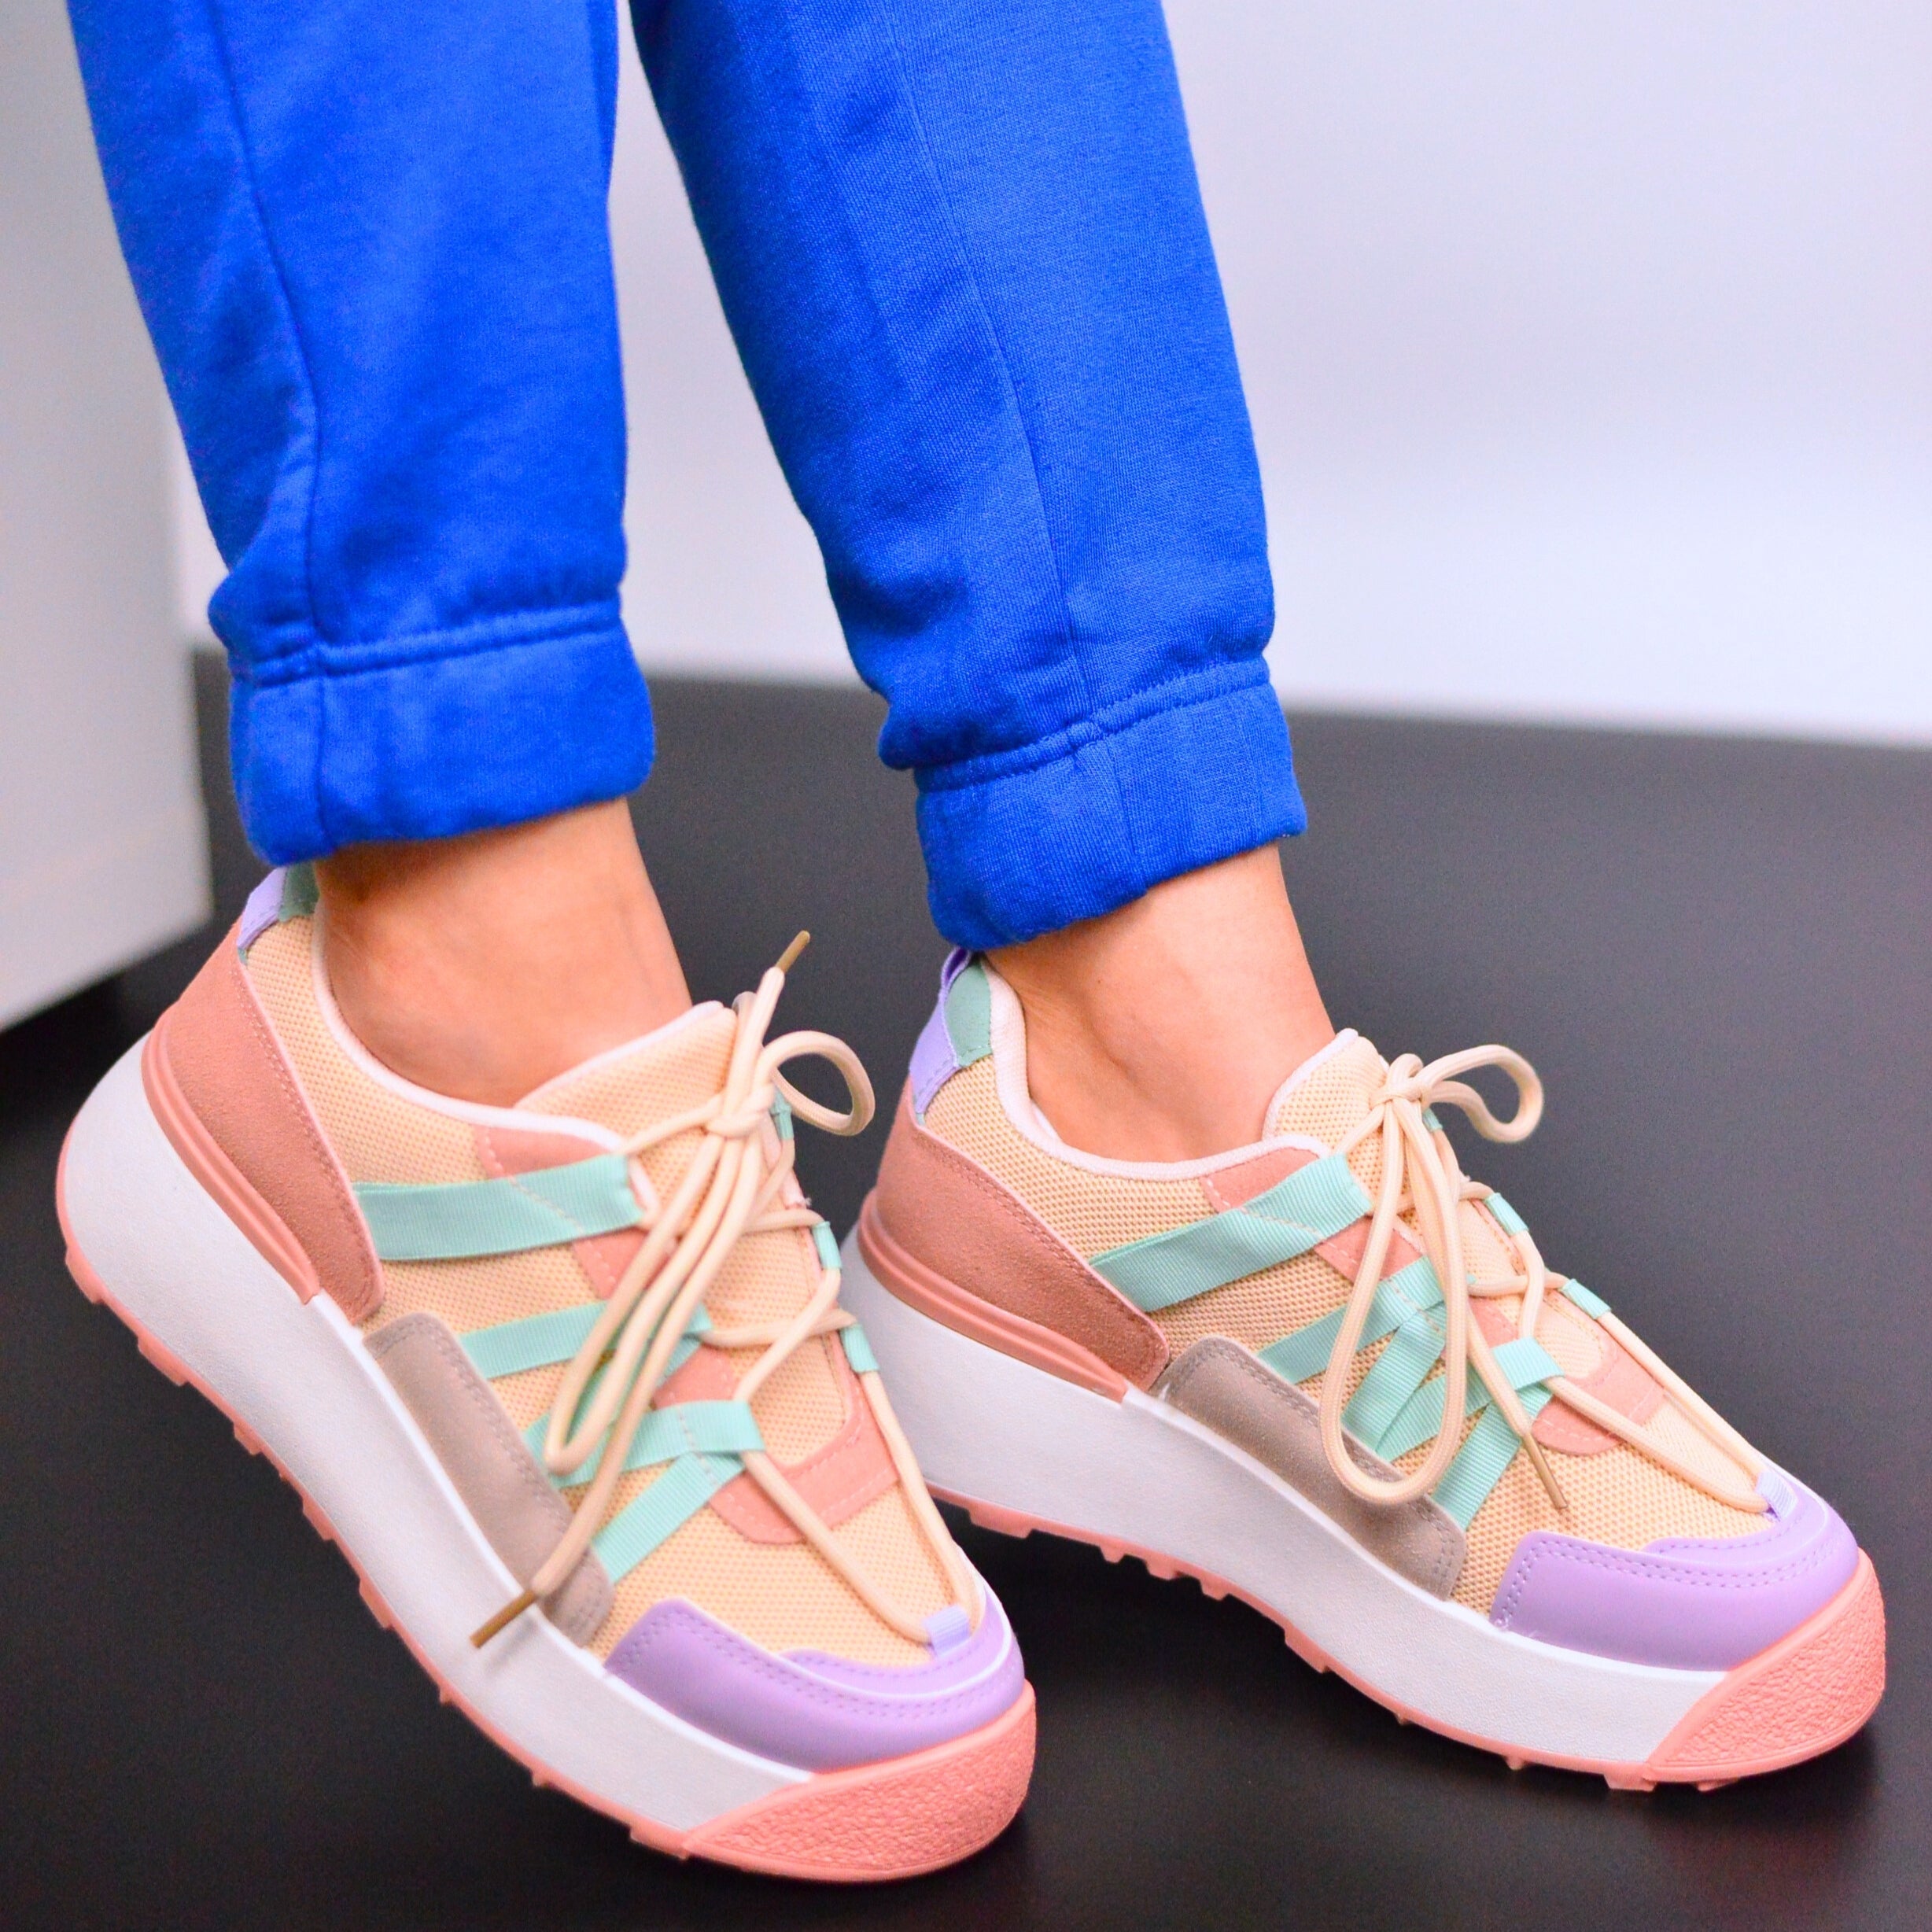 Women's Pink Nude Irina Sneakers Made Of Textile Material And Ecological Leather